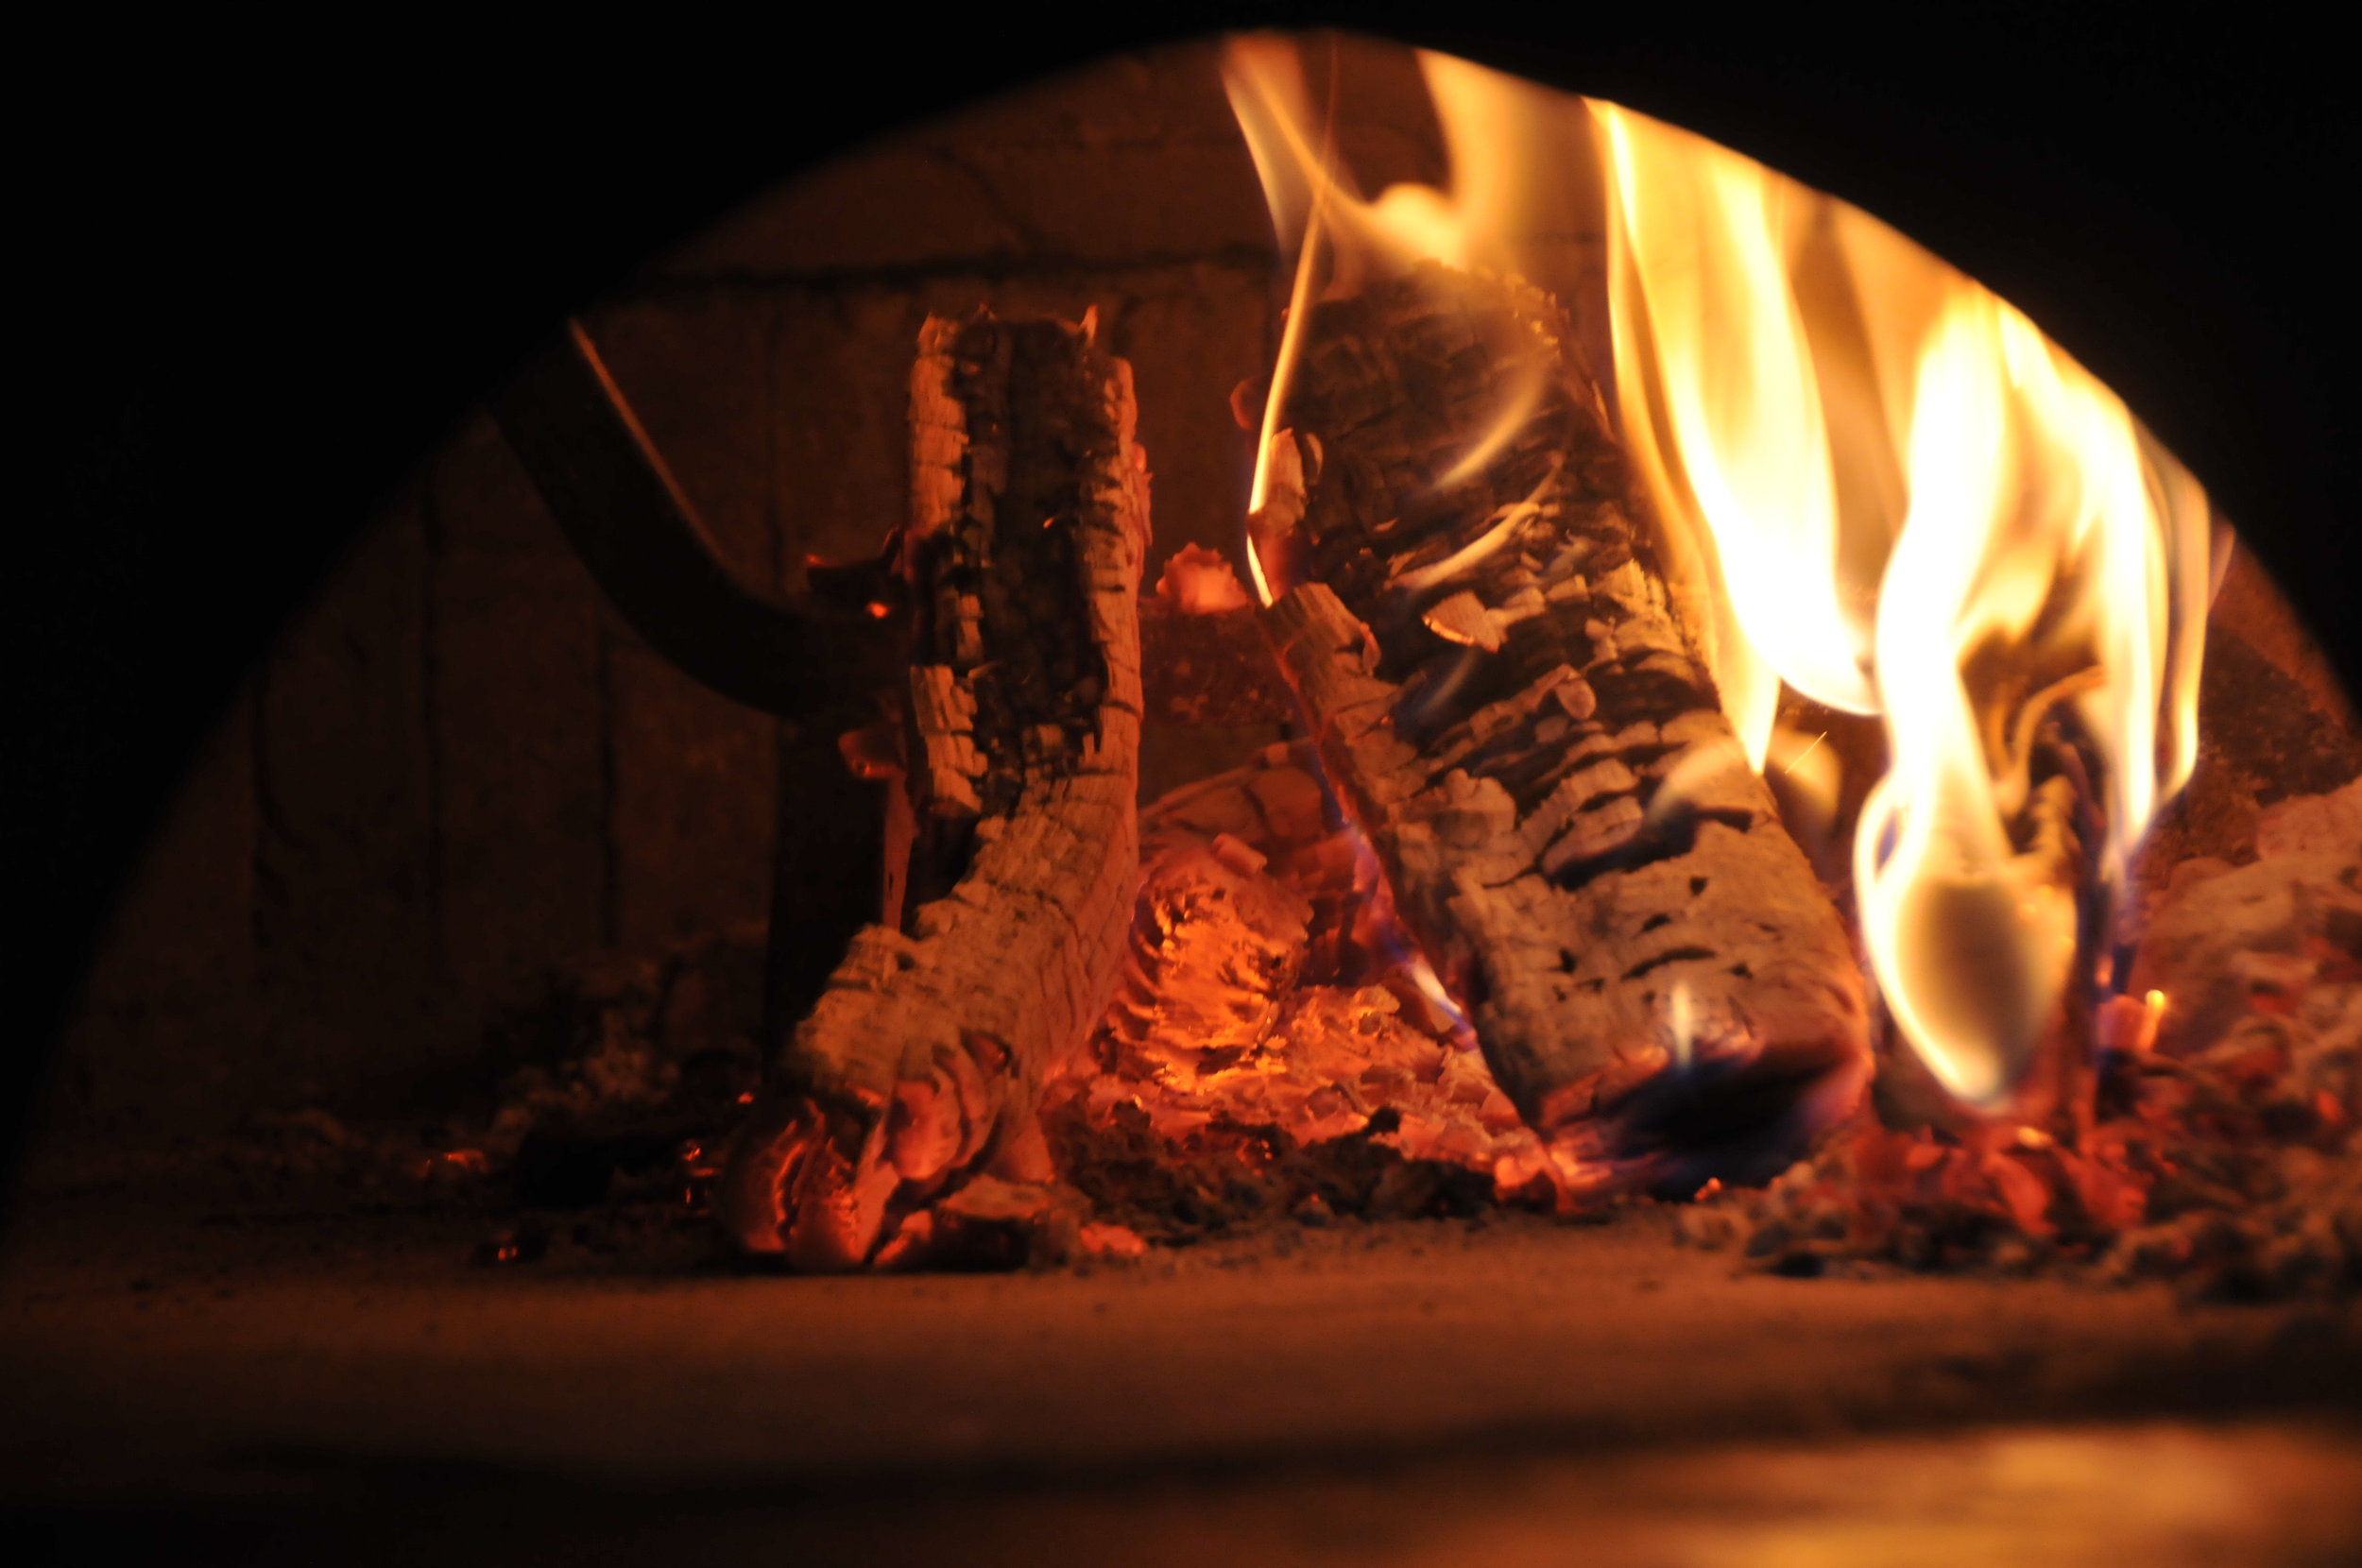  Pizzas are cooked in 60 seconds in Wood-Fired oven according to strict Italian tradition. 